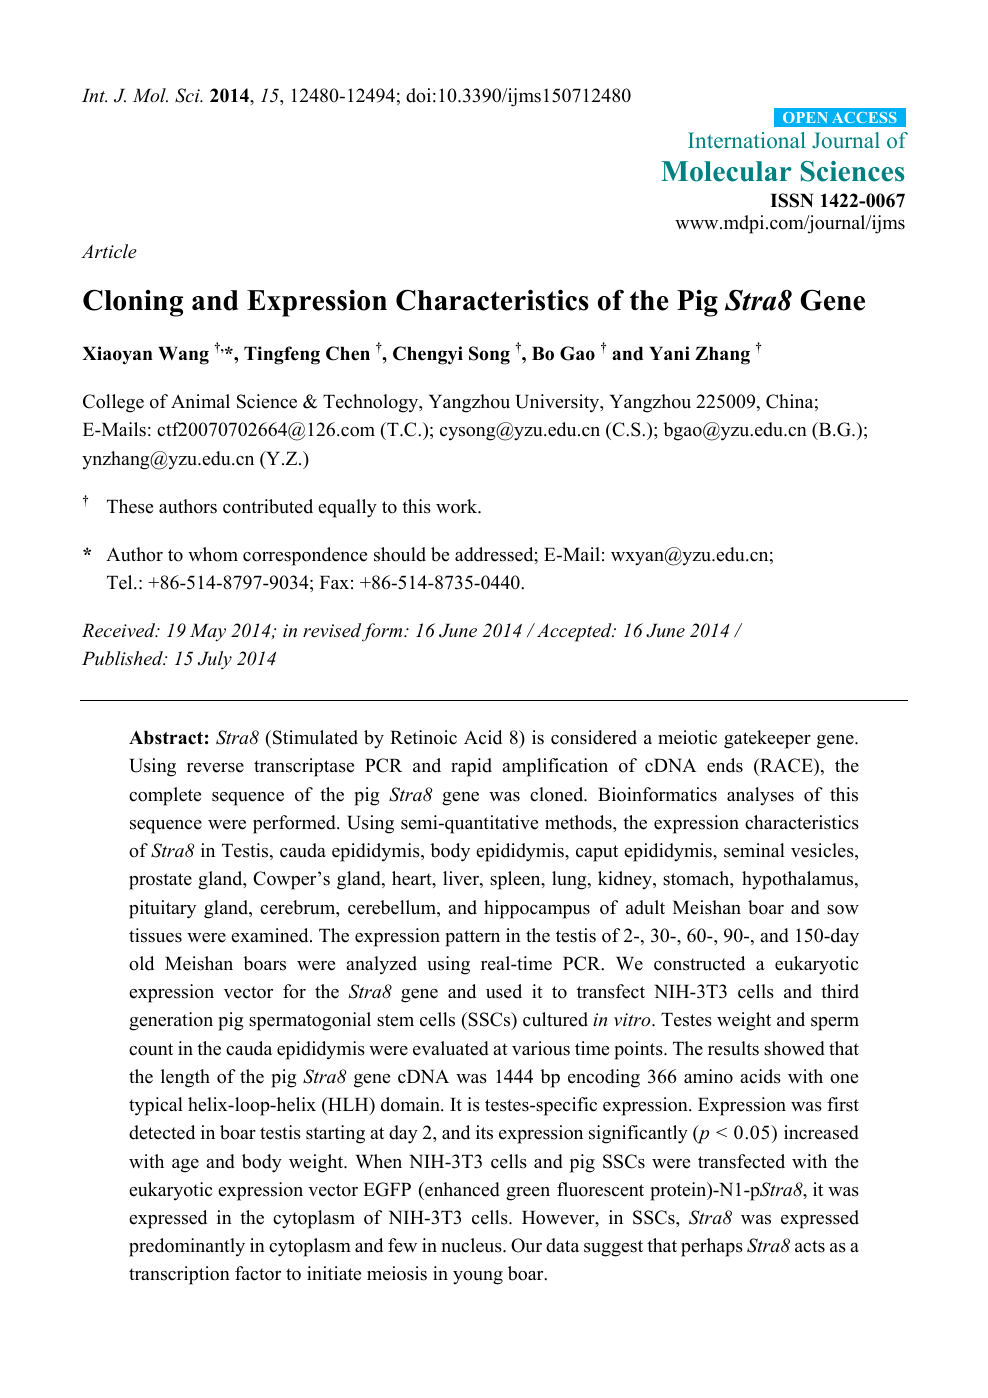 Cloning And Expression Characteristics Of The Pig Stra8 Gene Topic Of Research Paper In Biological Sciences Download Scholarly Article Pdf And Read For Free On Cyberleninka Open Science Hub